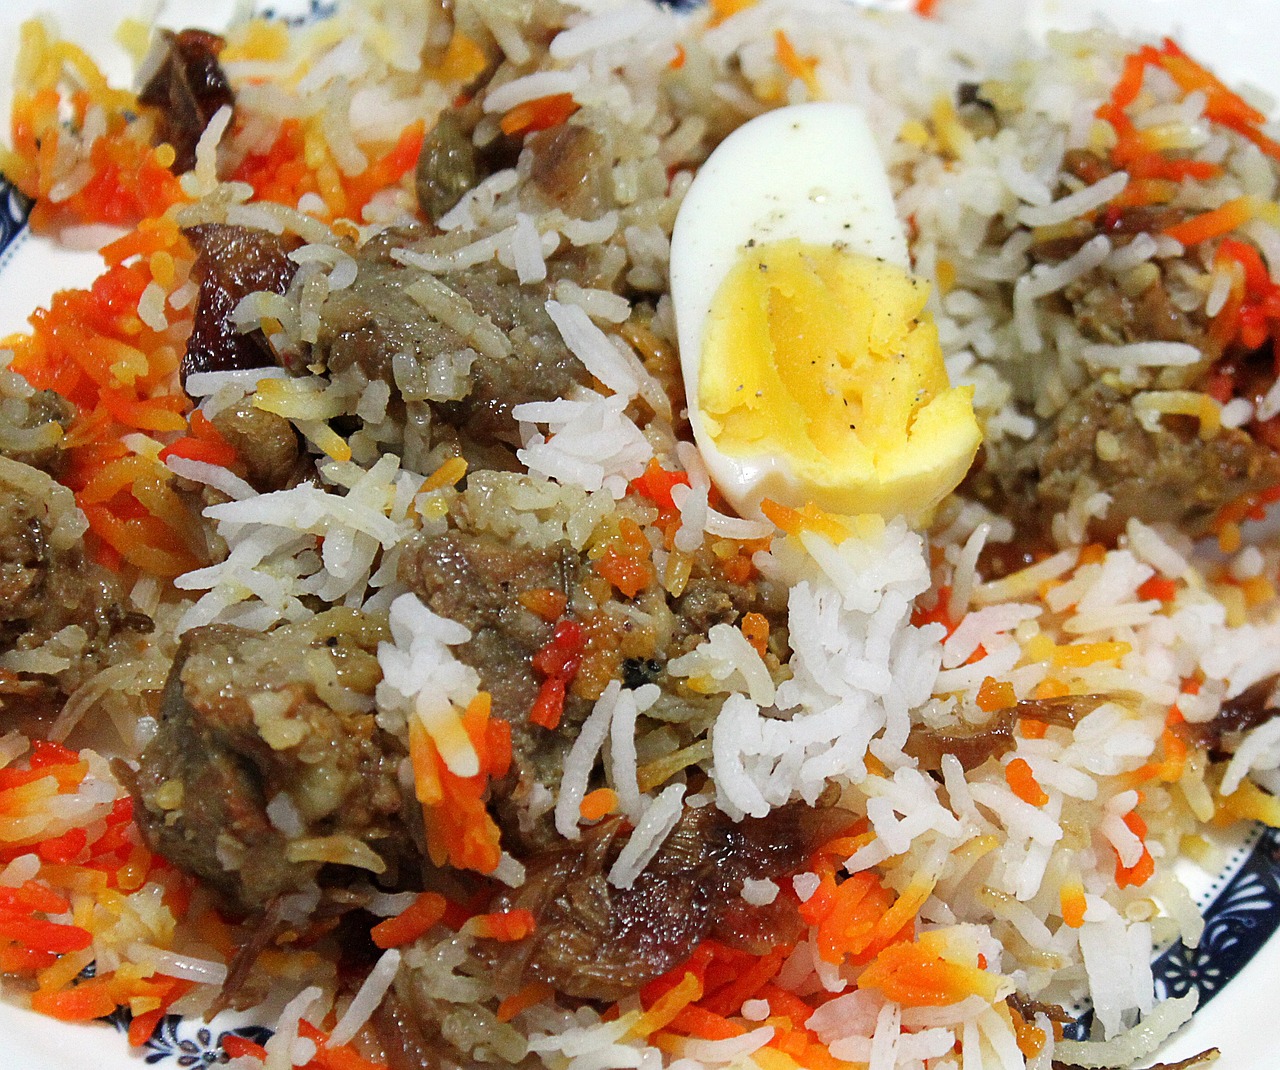 Exceptionally Savoury and Delicious Indian Fish Biryani